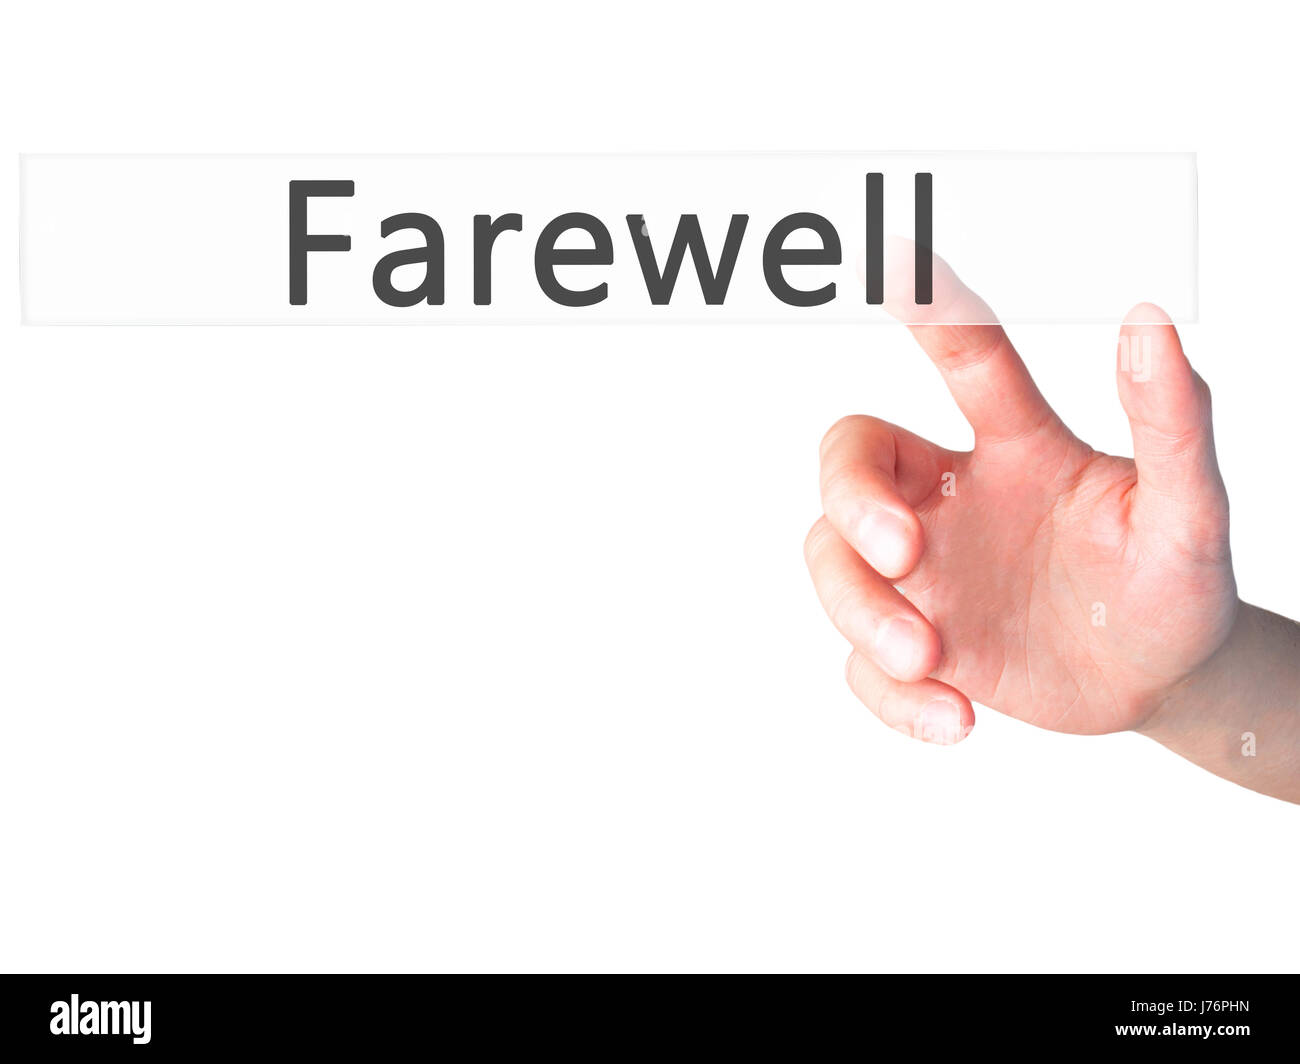 Farewell  - Hand pressing a button on blurred background concept . Business, technology, internet concept. Stock Photo Stock Photo